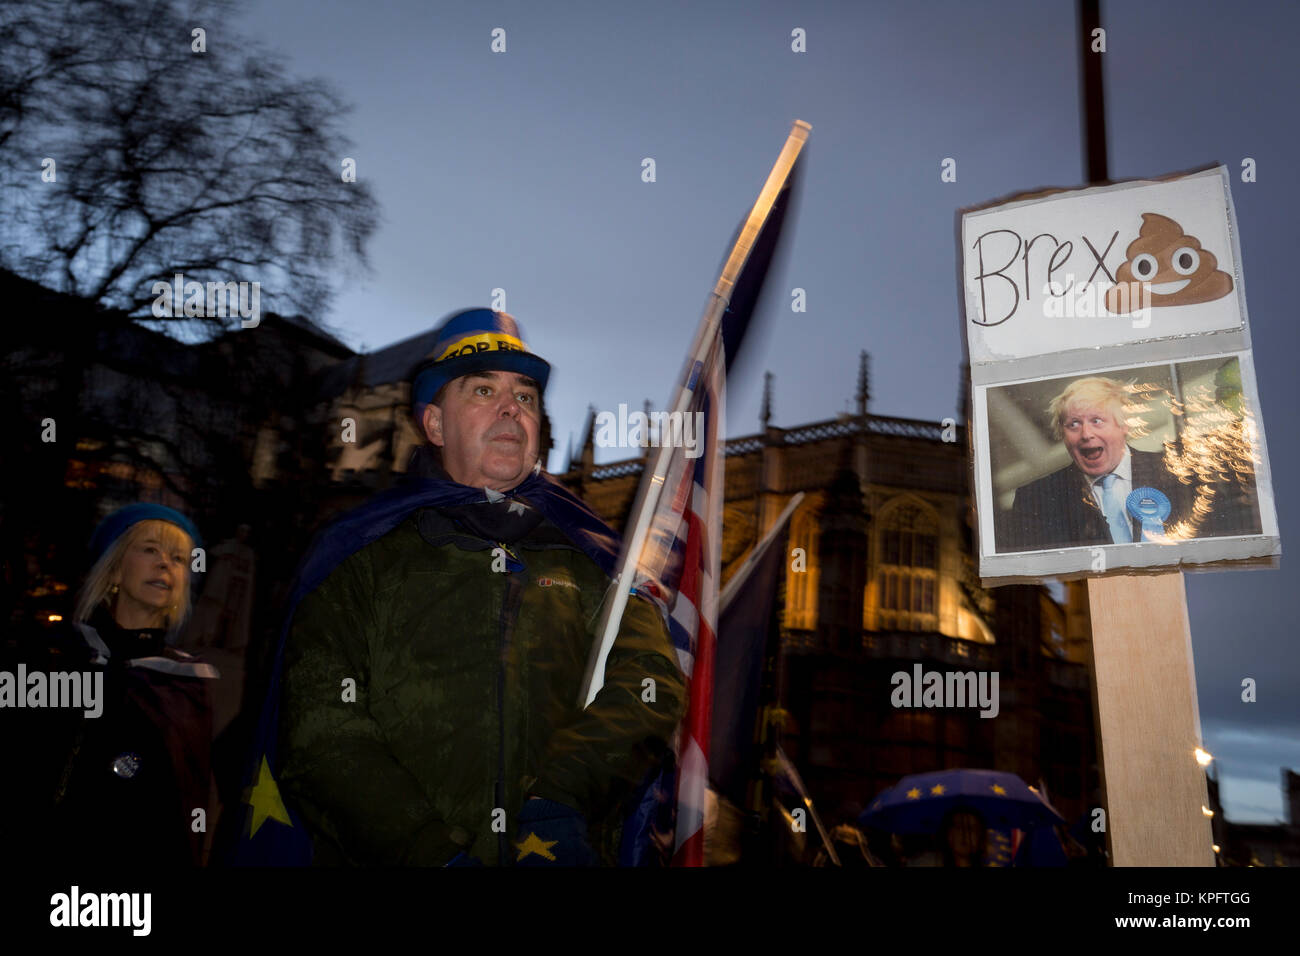 While MPs debate the Brexit Withdrawal Bill and ultimately vote in the House of Commons, Pro-EU Anti-Brexit protesters wave EU and Union Jack flags next to a parody of leading Brexiteer Boris Johnson outside Parliament, on 13th December 2017 in London, England. Stock Photo